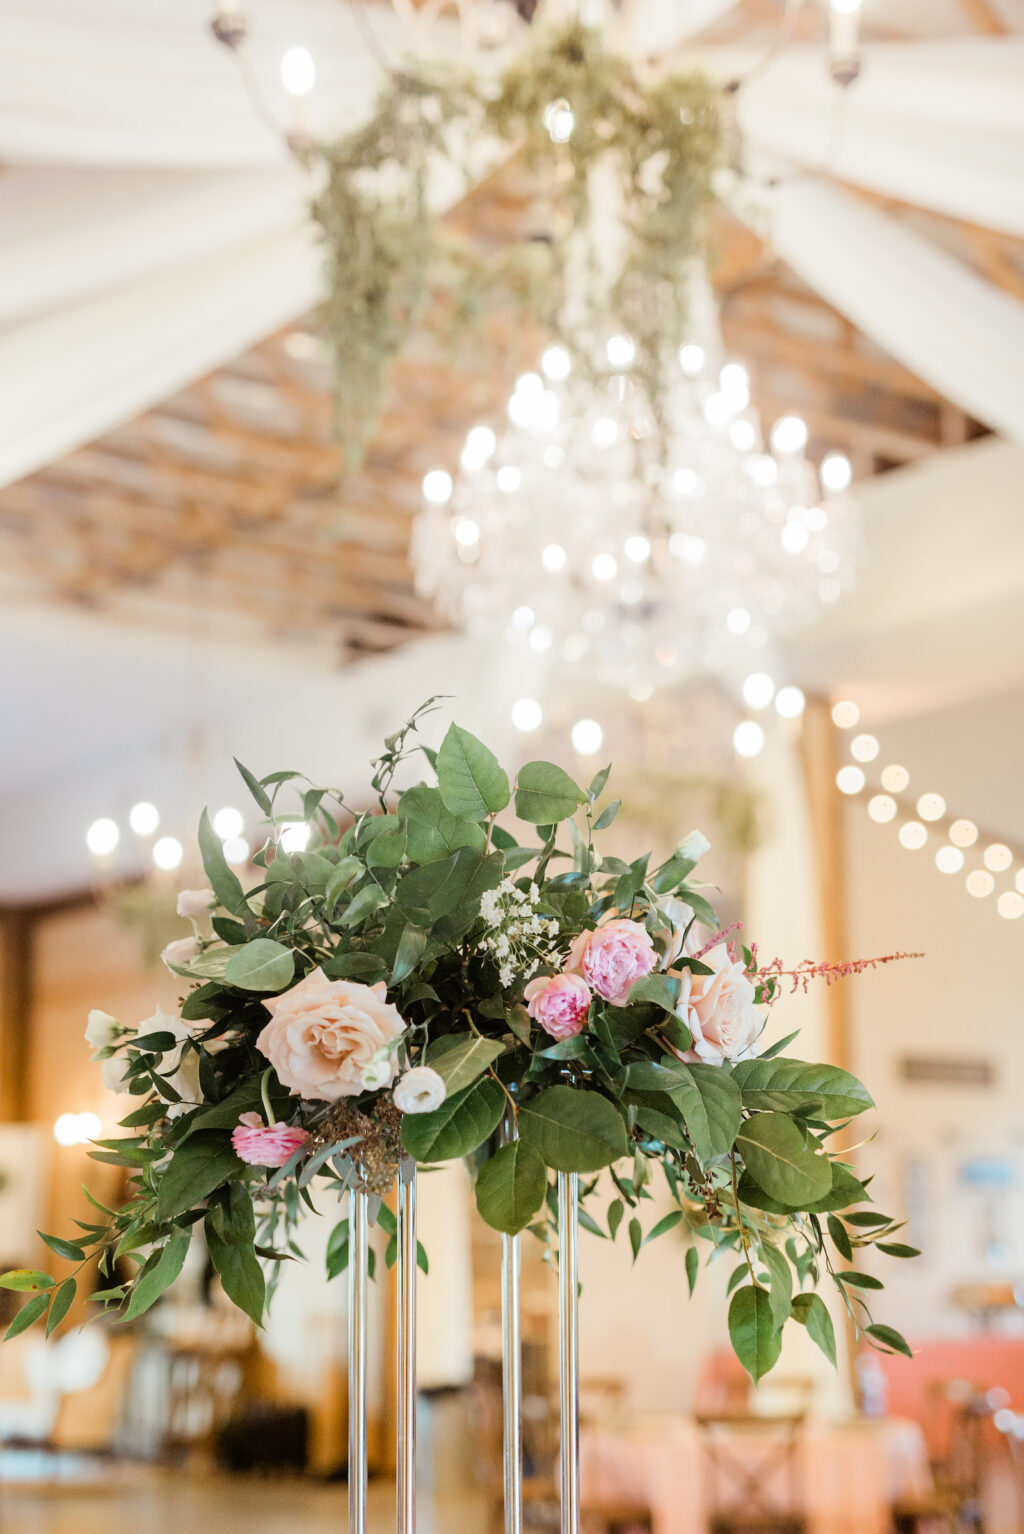 Rustic Tall Floral Centerpieces with Pink Florals and Greenery in Tall Silver Stand